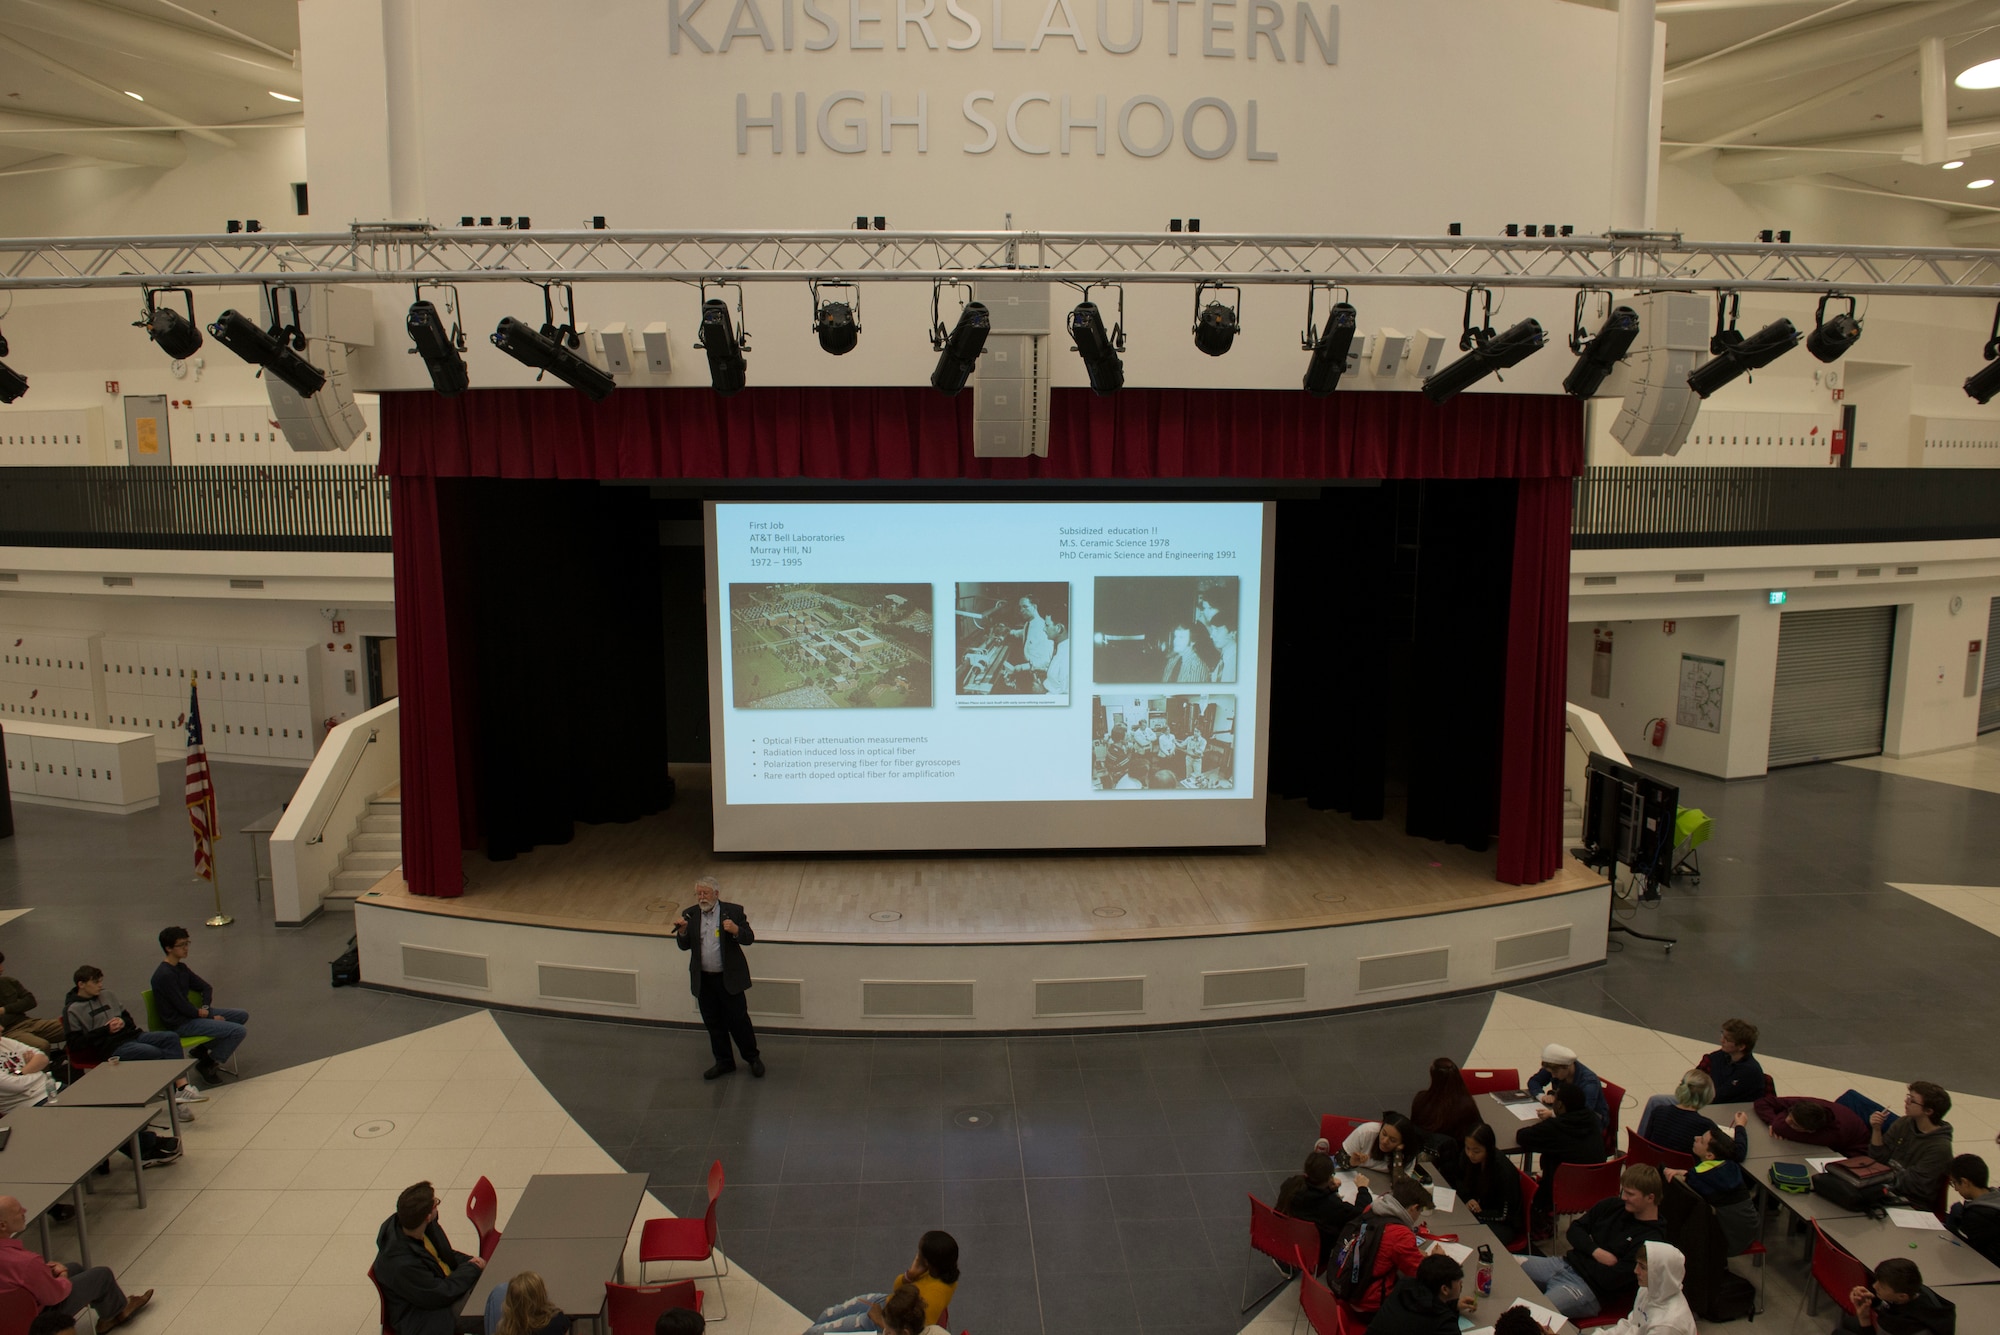 Jay Simpson, former Technical Director and Program Manager for the CIA, speaks about his life and science expertise at Kaiserslautern High School on Kapaun Air Station, Germany, Dec. 16, 2020. Simpson was part of a seven-year partnership with the Air Force Association and Kaiserslautern High School Science, Technology, Engineering and Mathematics program which fosters learning in those specific disciplines.